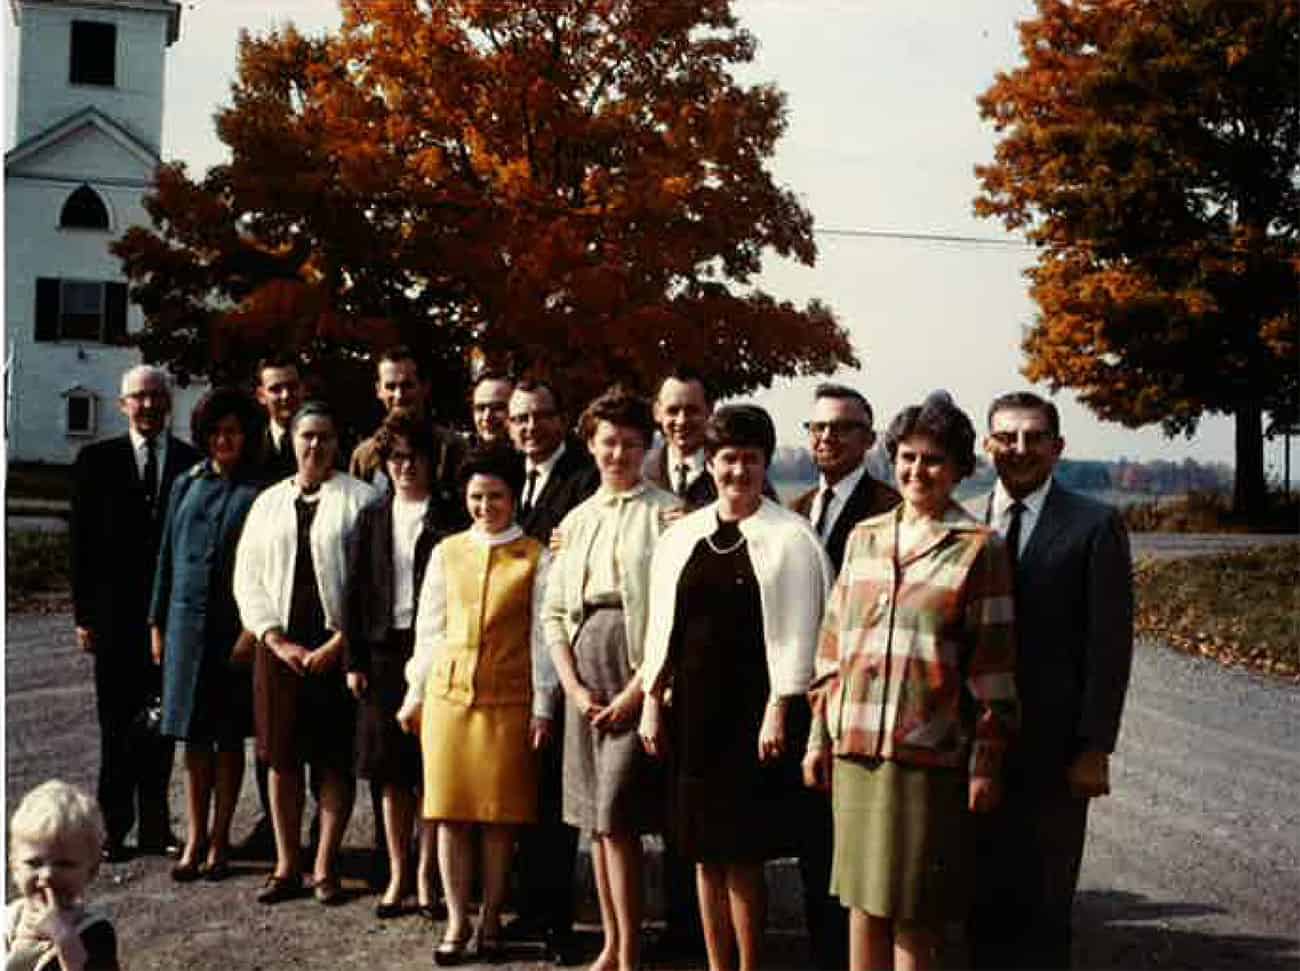 Reverend Duff and a small congregation in 1977